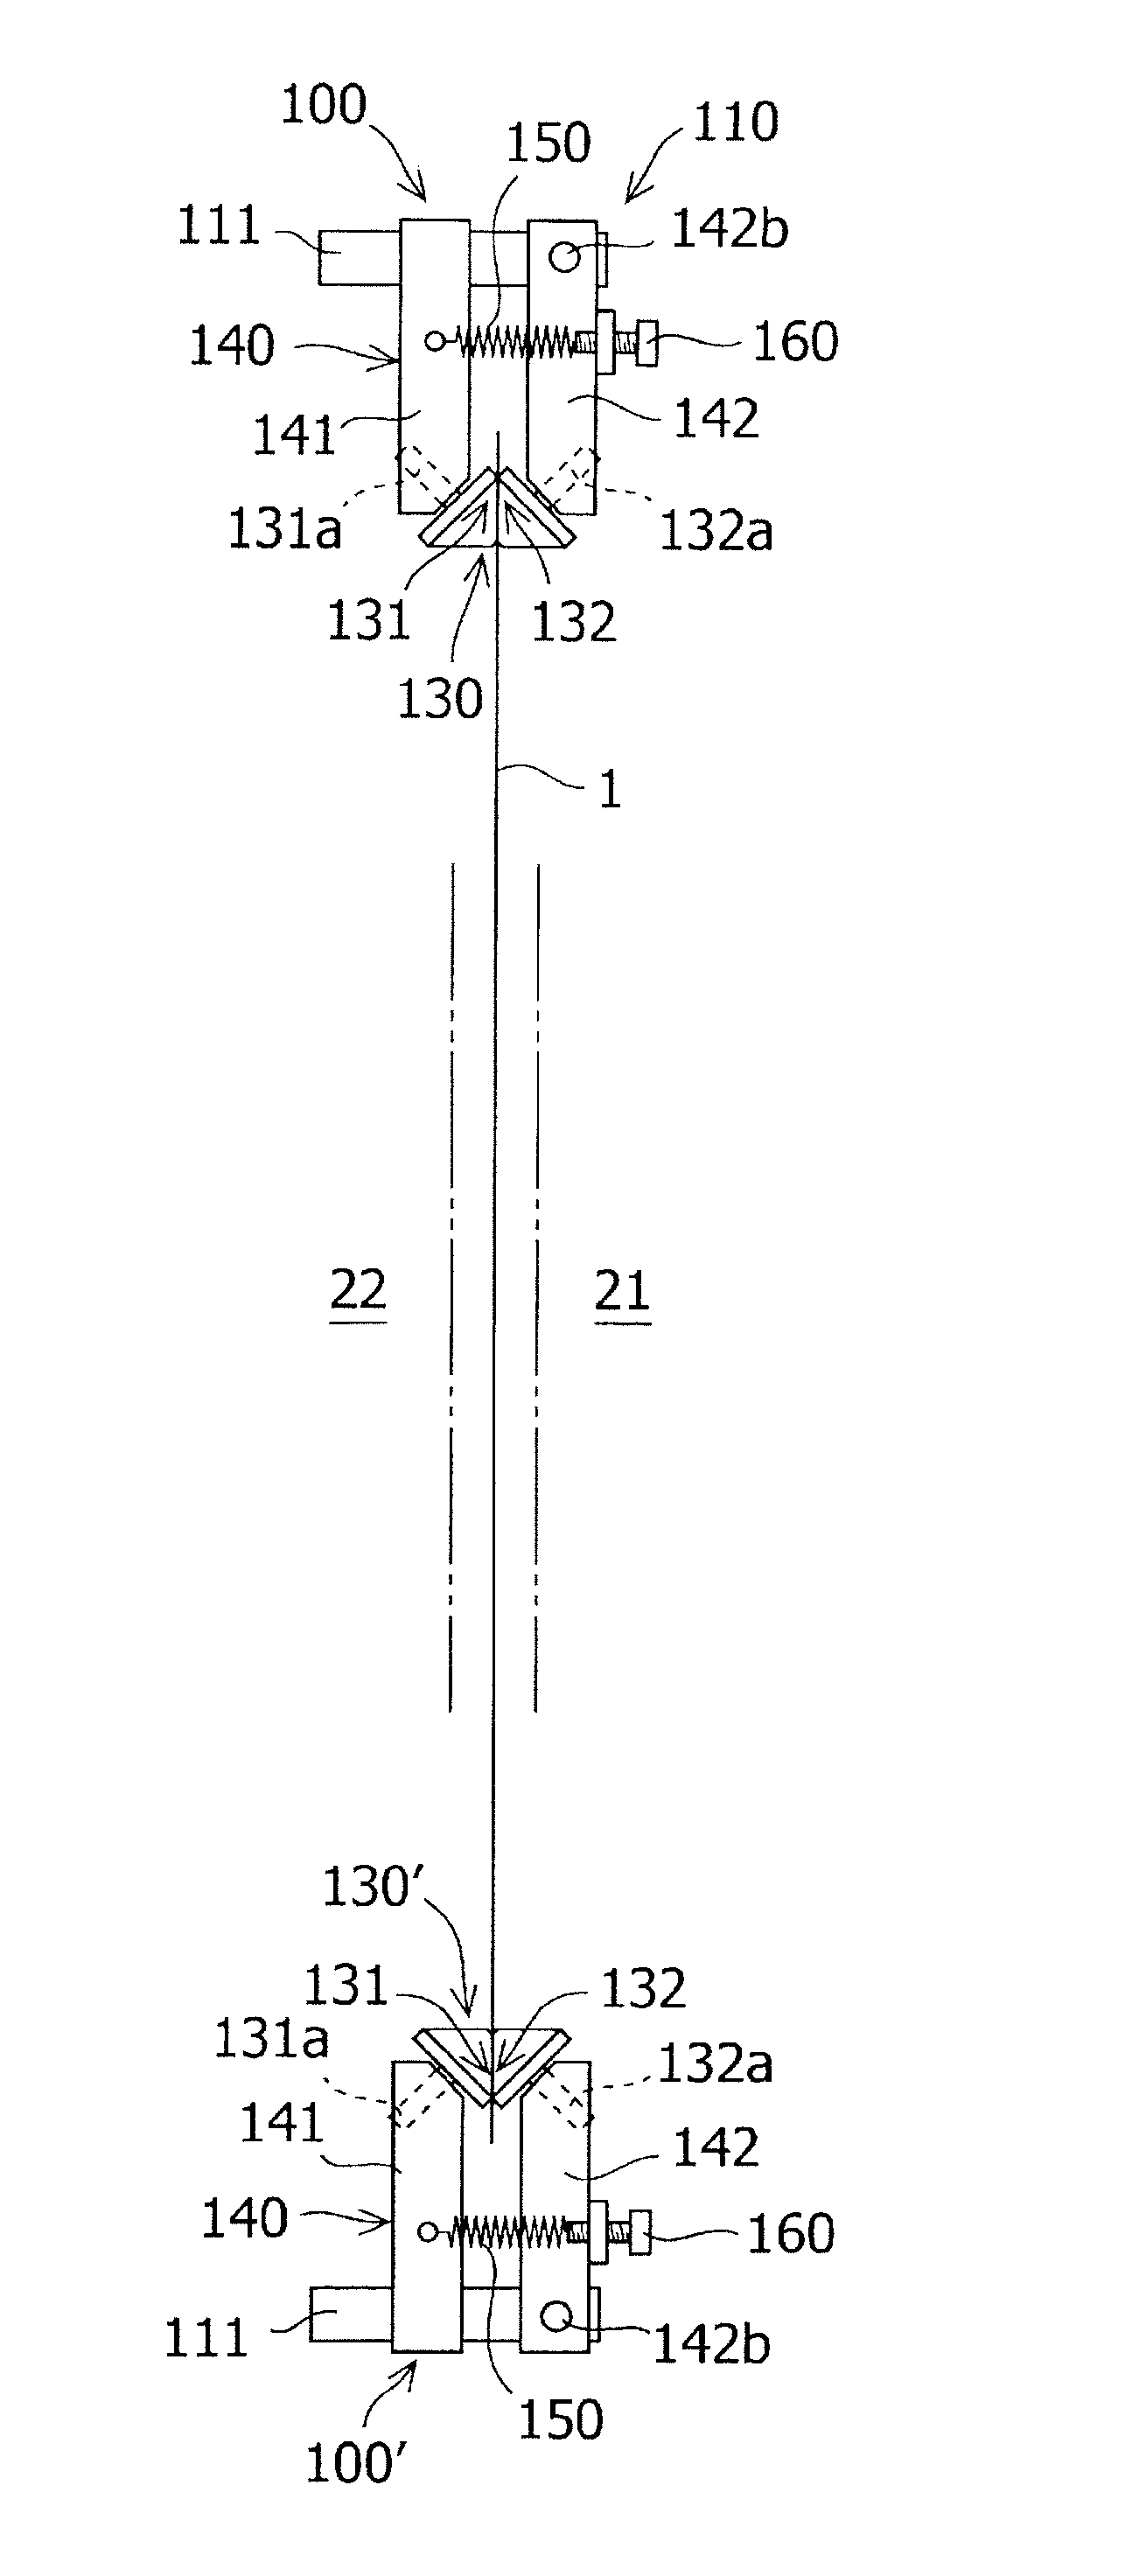 Position controller for flexible substrate